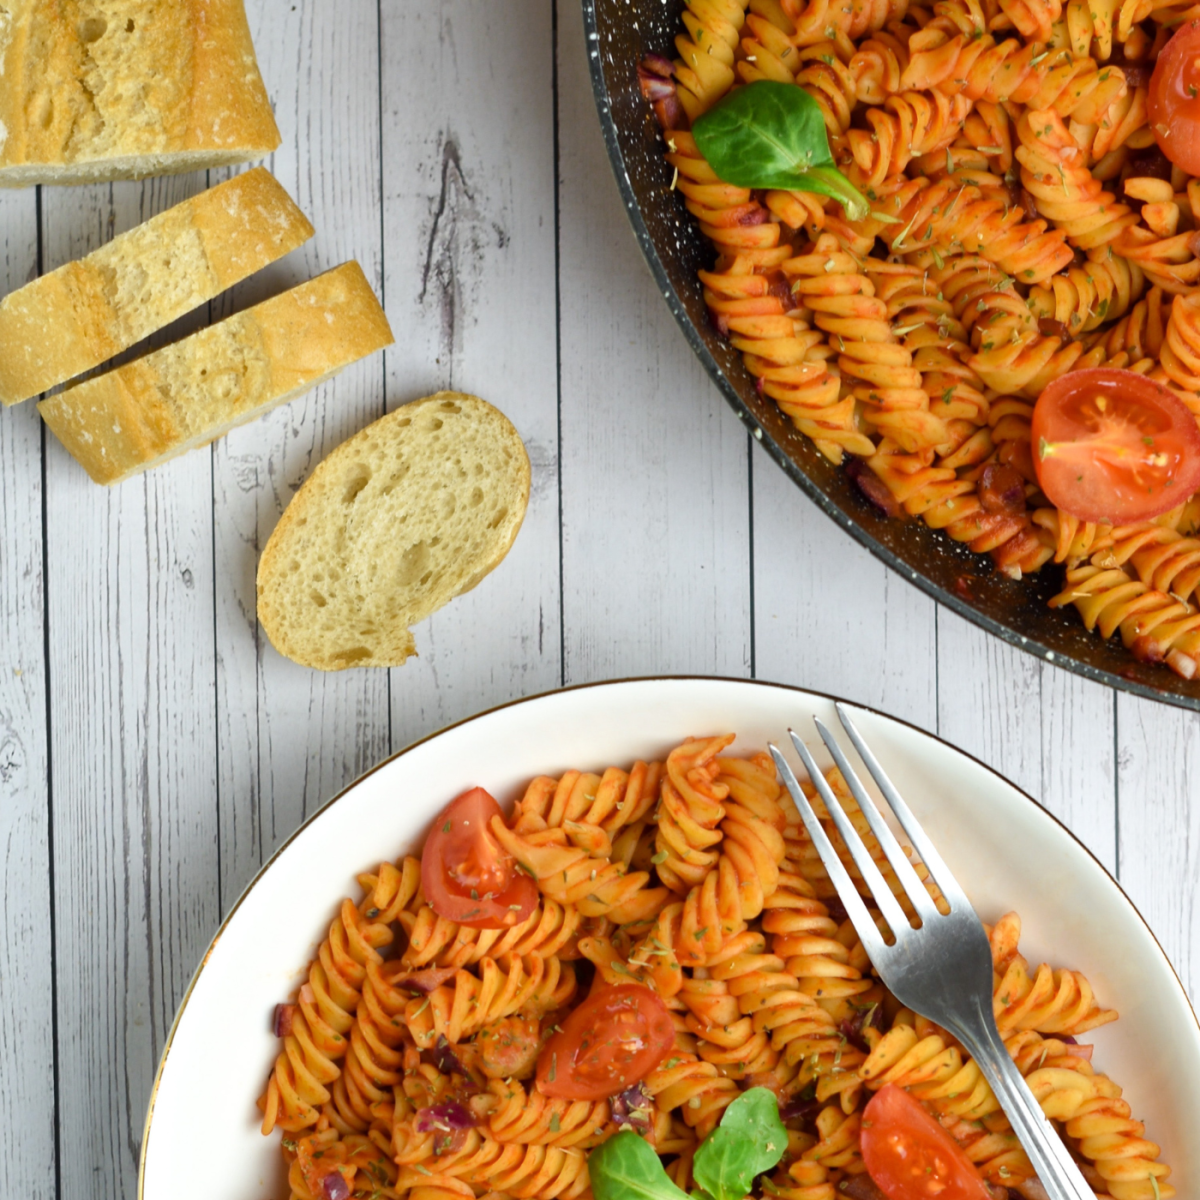 Try to avoid carb-loaded foods like bread and pasta. 